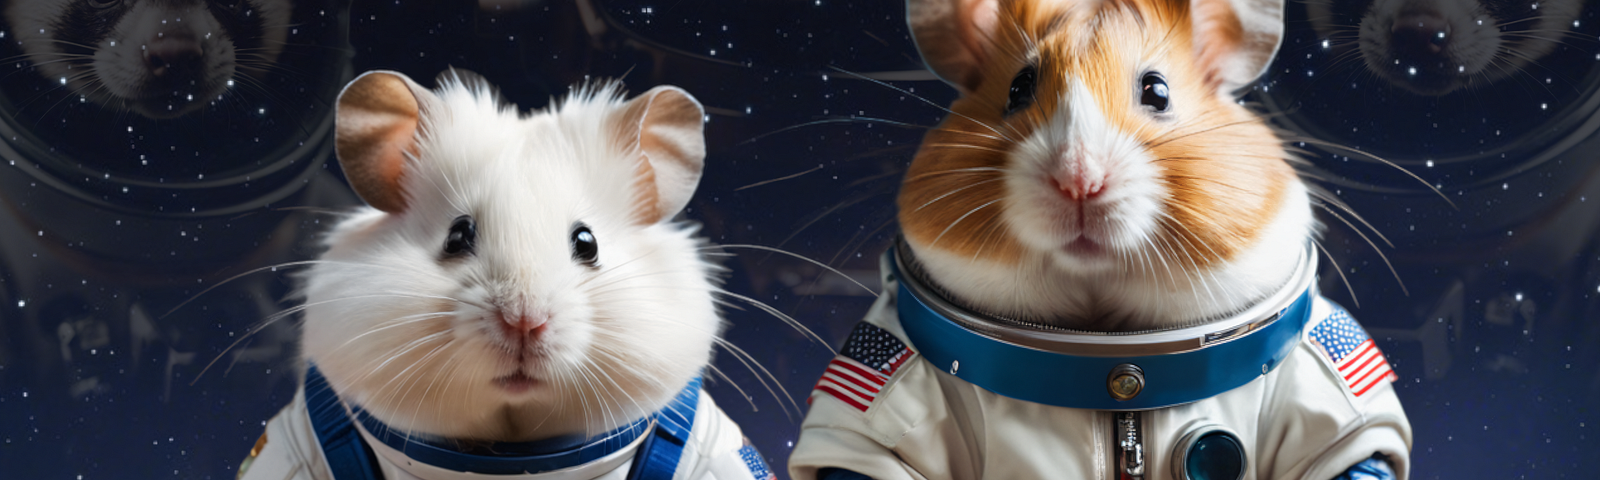 Two hamster astronauts in space